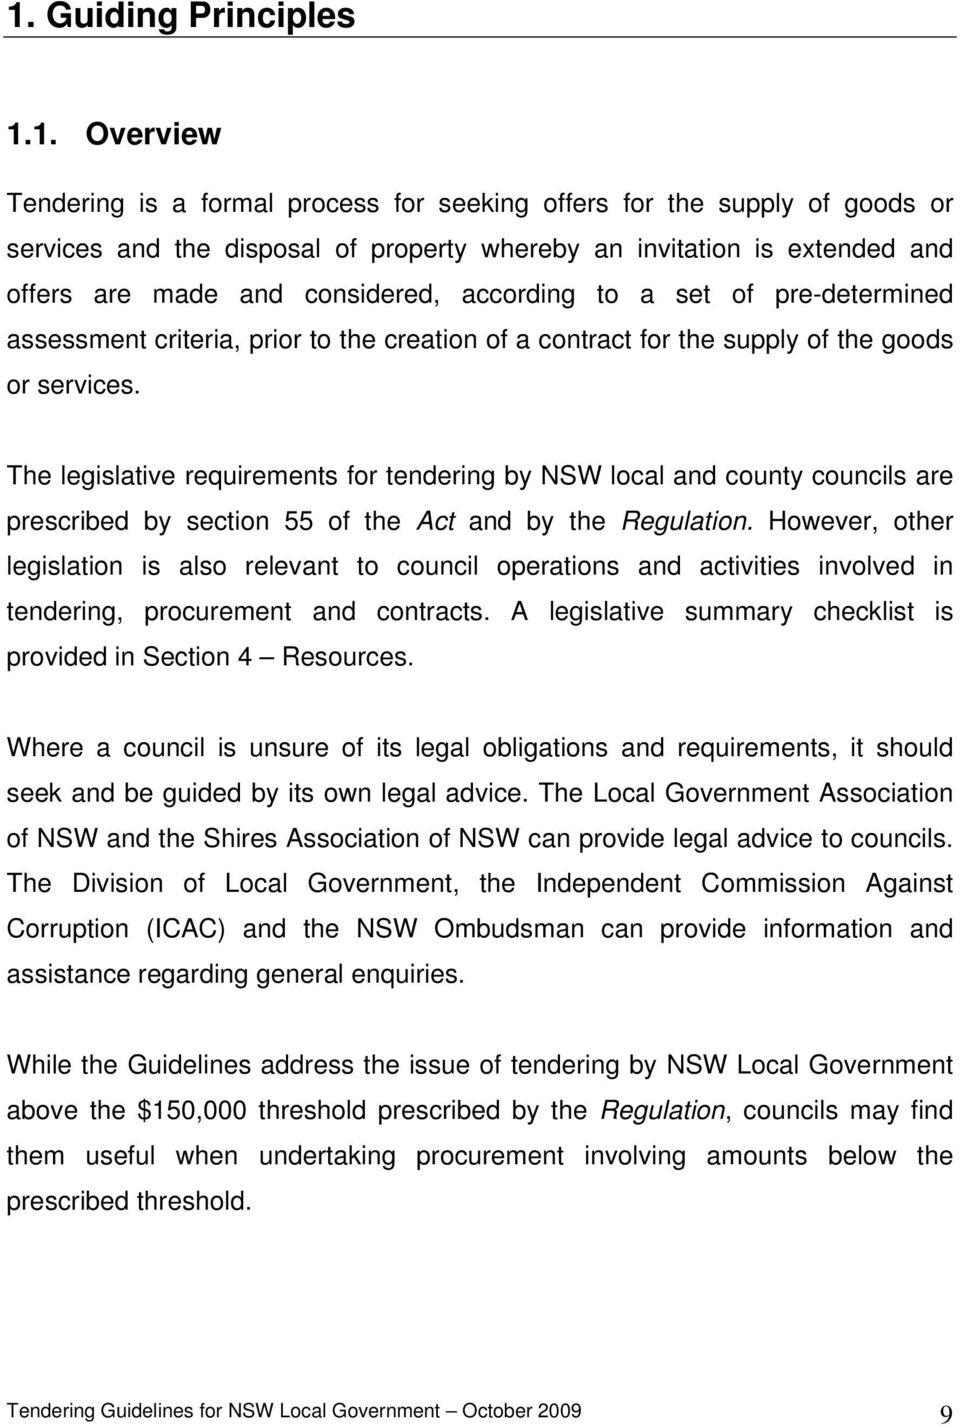 The legislative requirements for tendering by NSW local and county councils are prescribed by section 55 of the Act and by the Regulation.